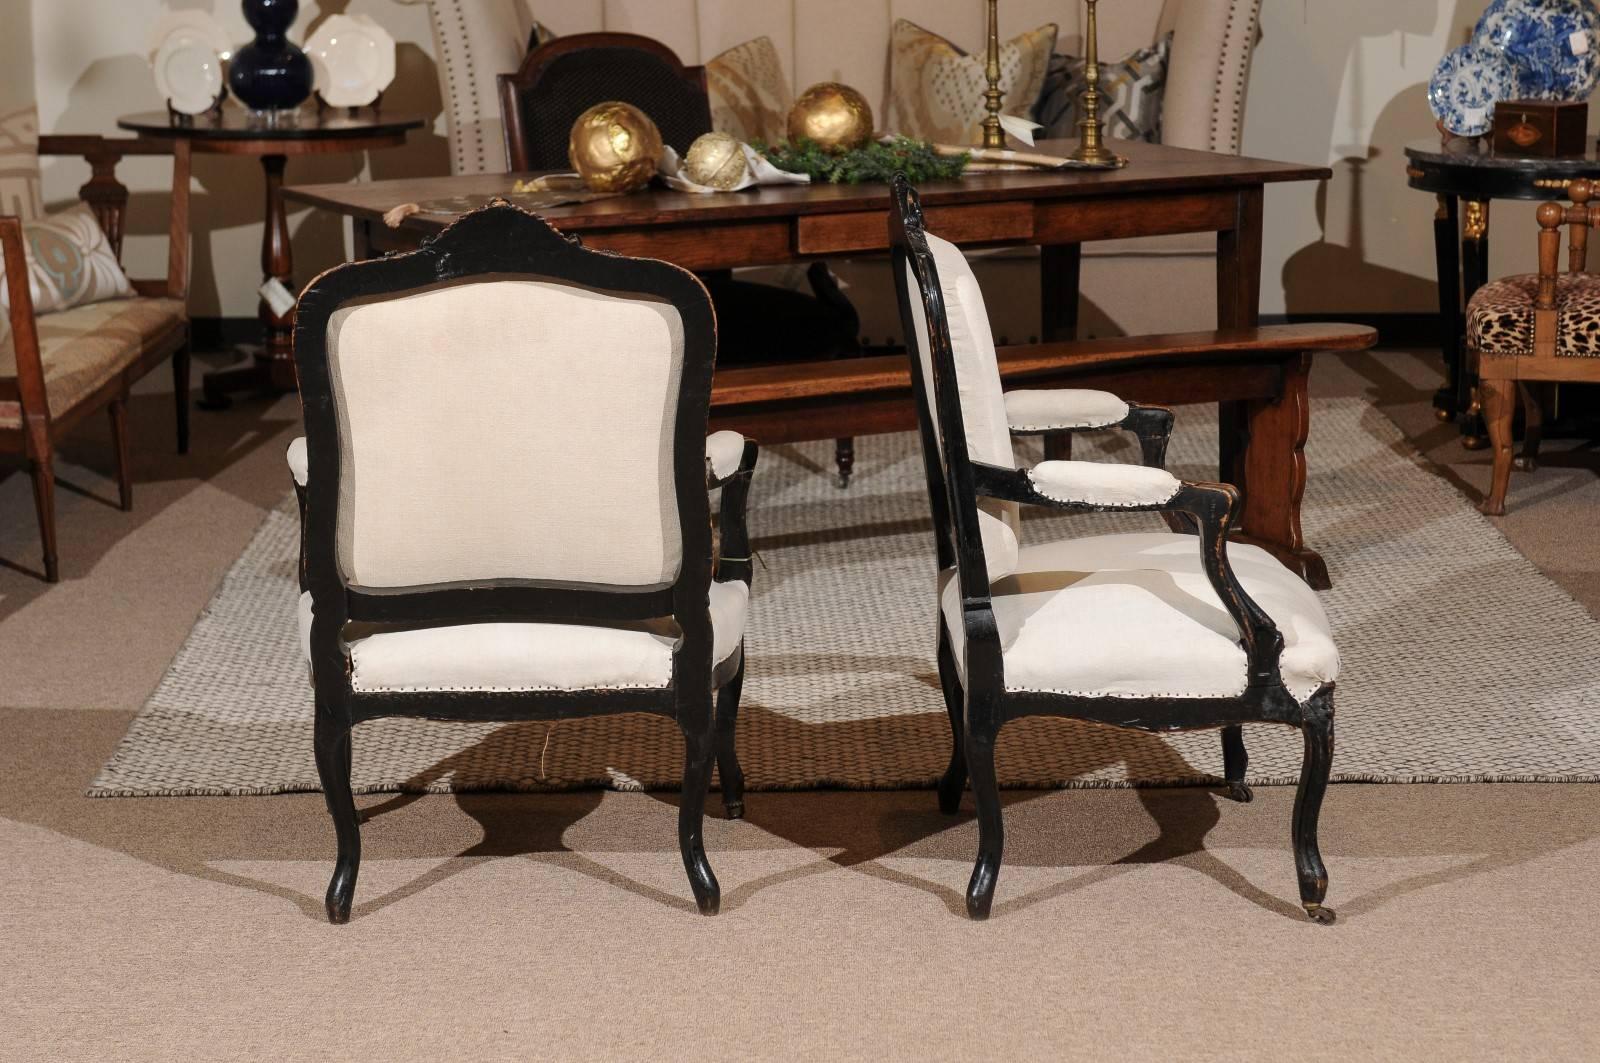 Pair of 19th Century Black Louis XVth Style Armchairs, circa 1880 In Good Condition For Sale In Atlanta, GA